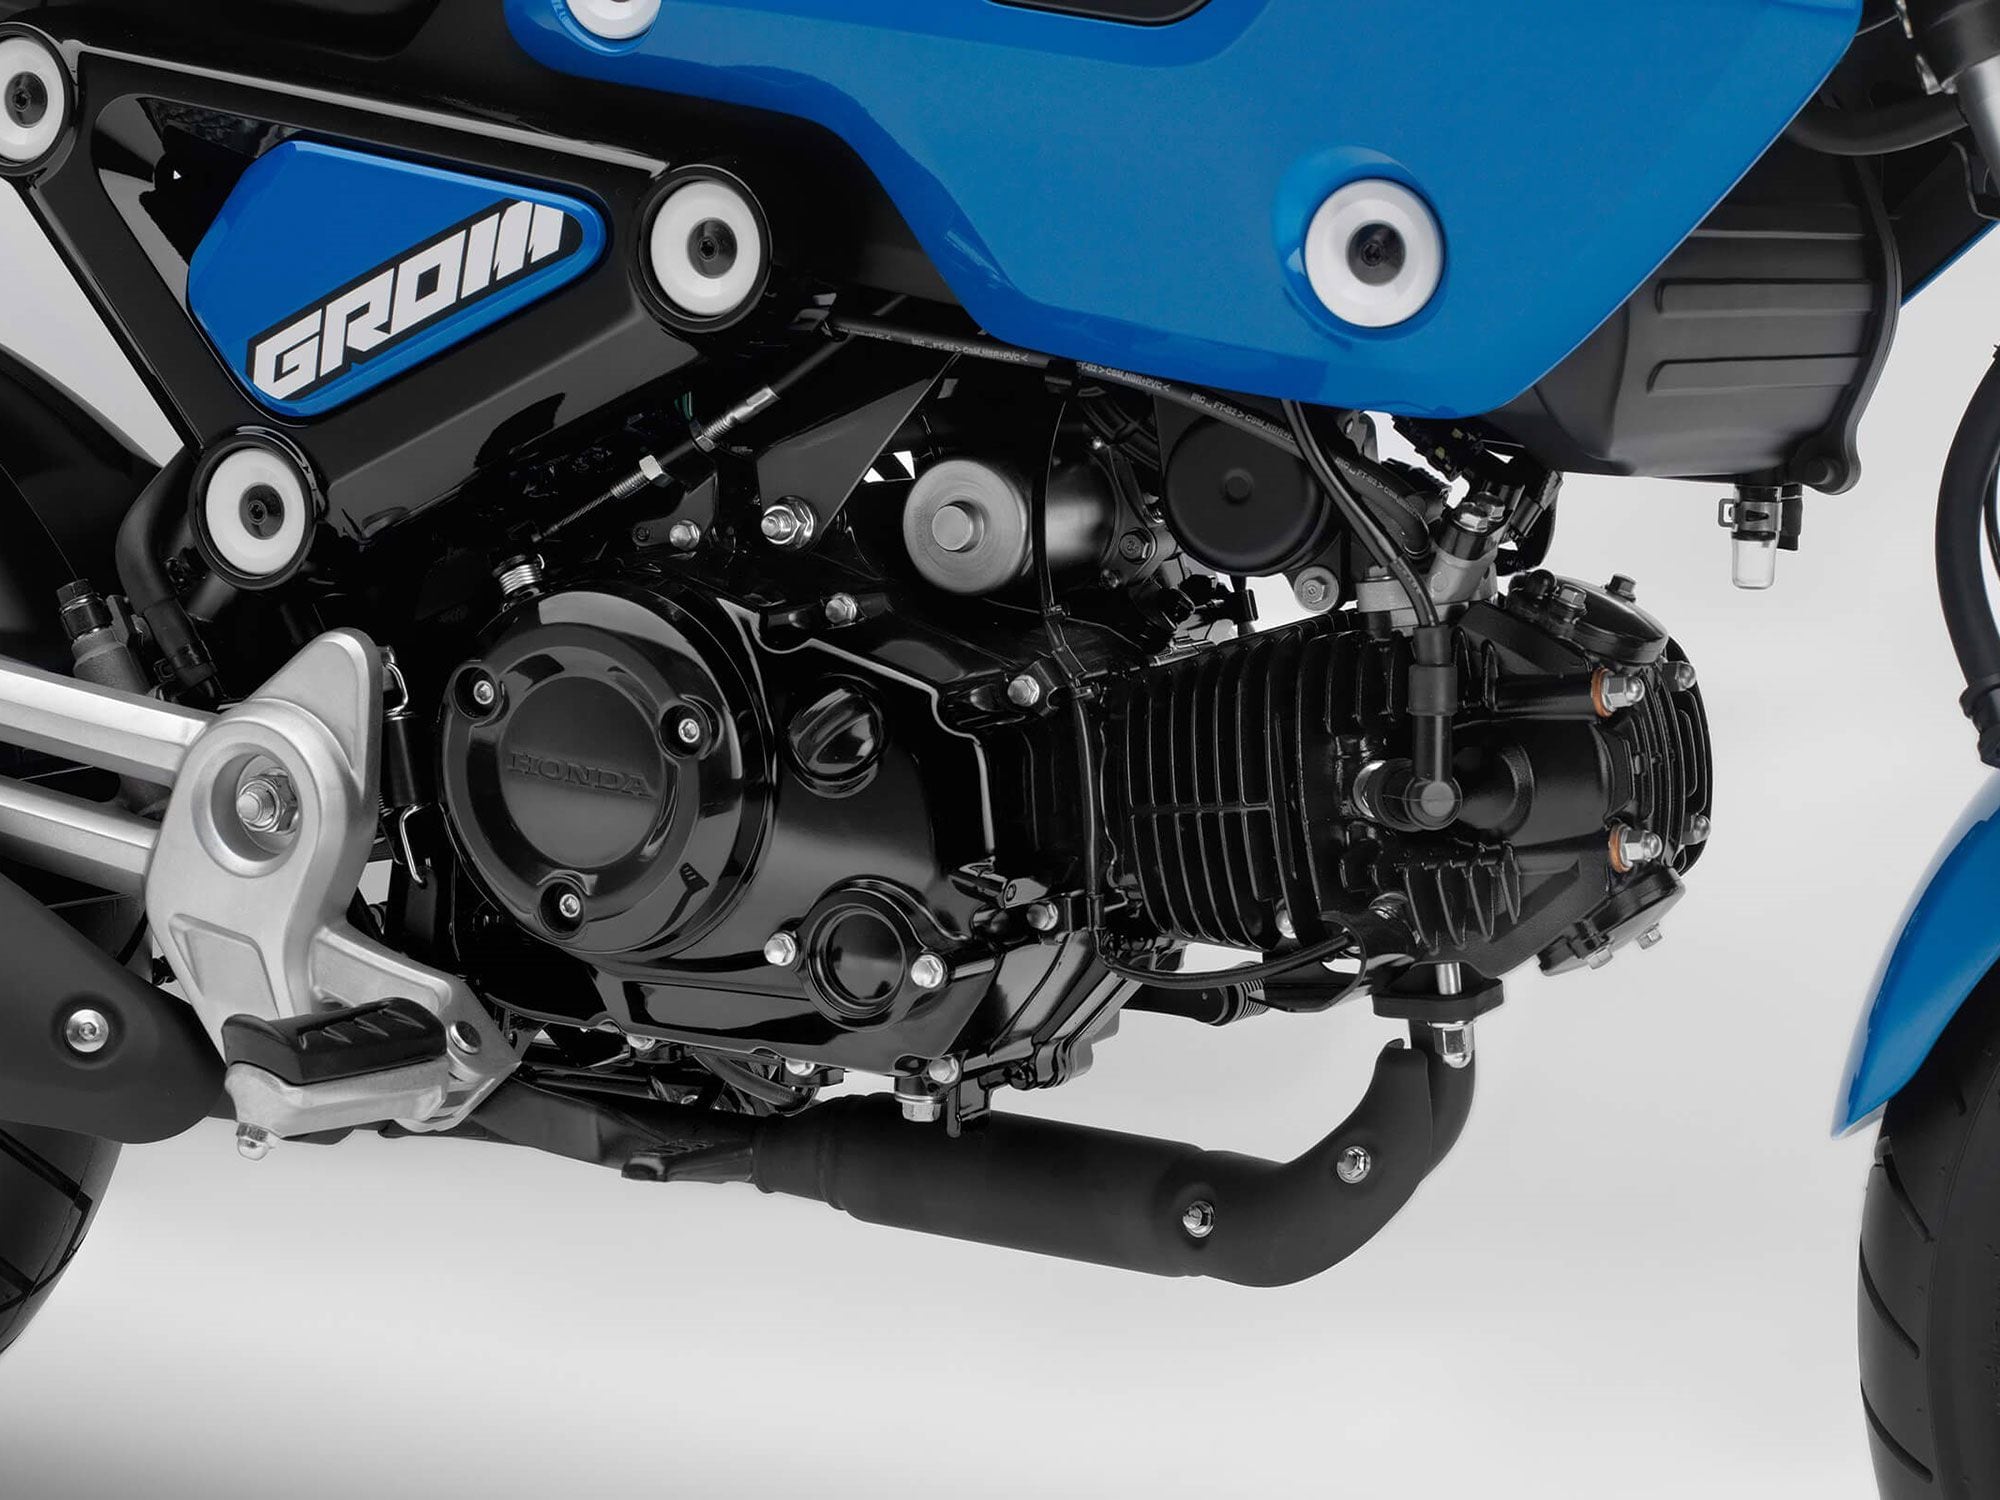 The 125cc two-valve engine has a narrower bore and longer stroke than its predecessor (50mm x 63.1mm compared to 52.4mm x 57.9mm) as well as a higher compression ratio of 10.0:1 (9.3:1 previously).